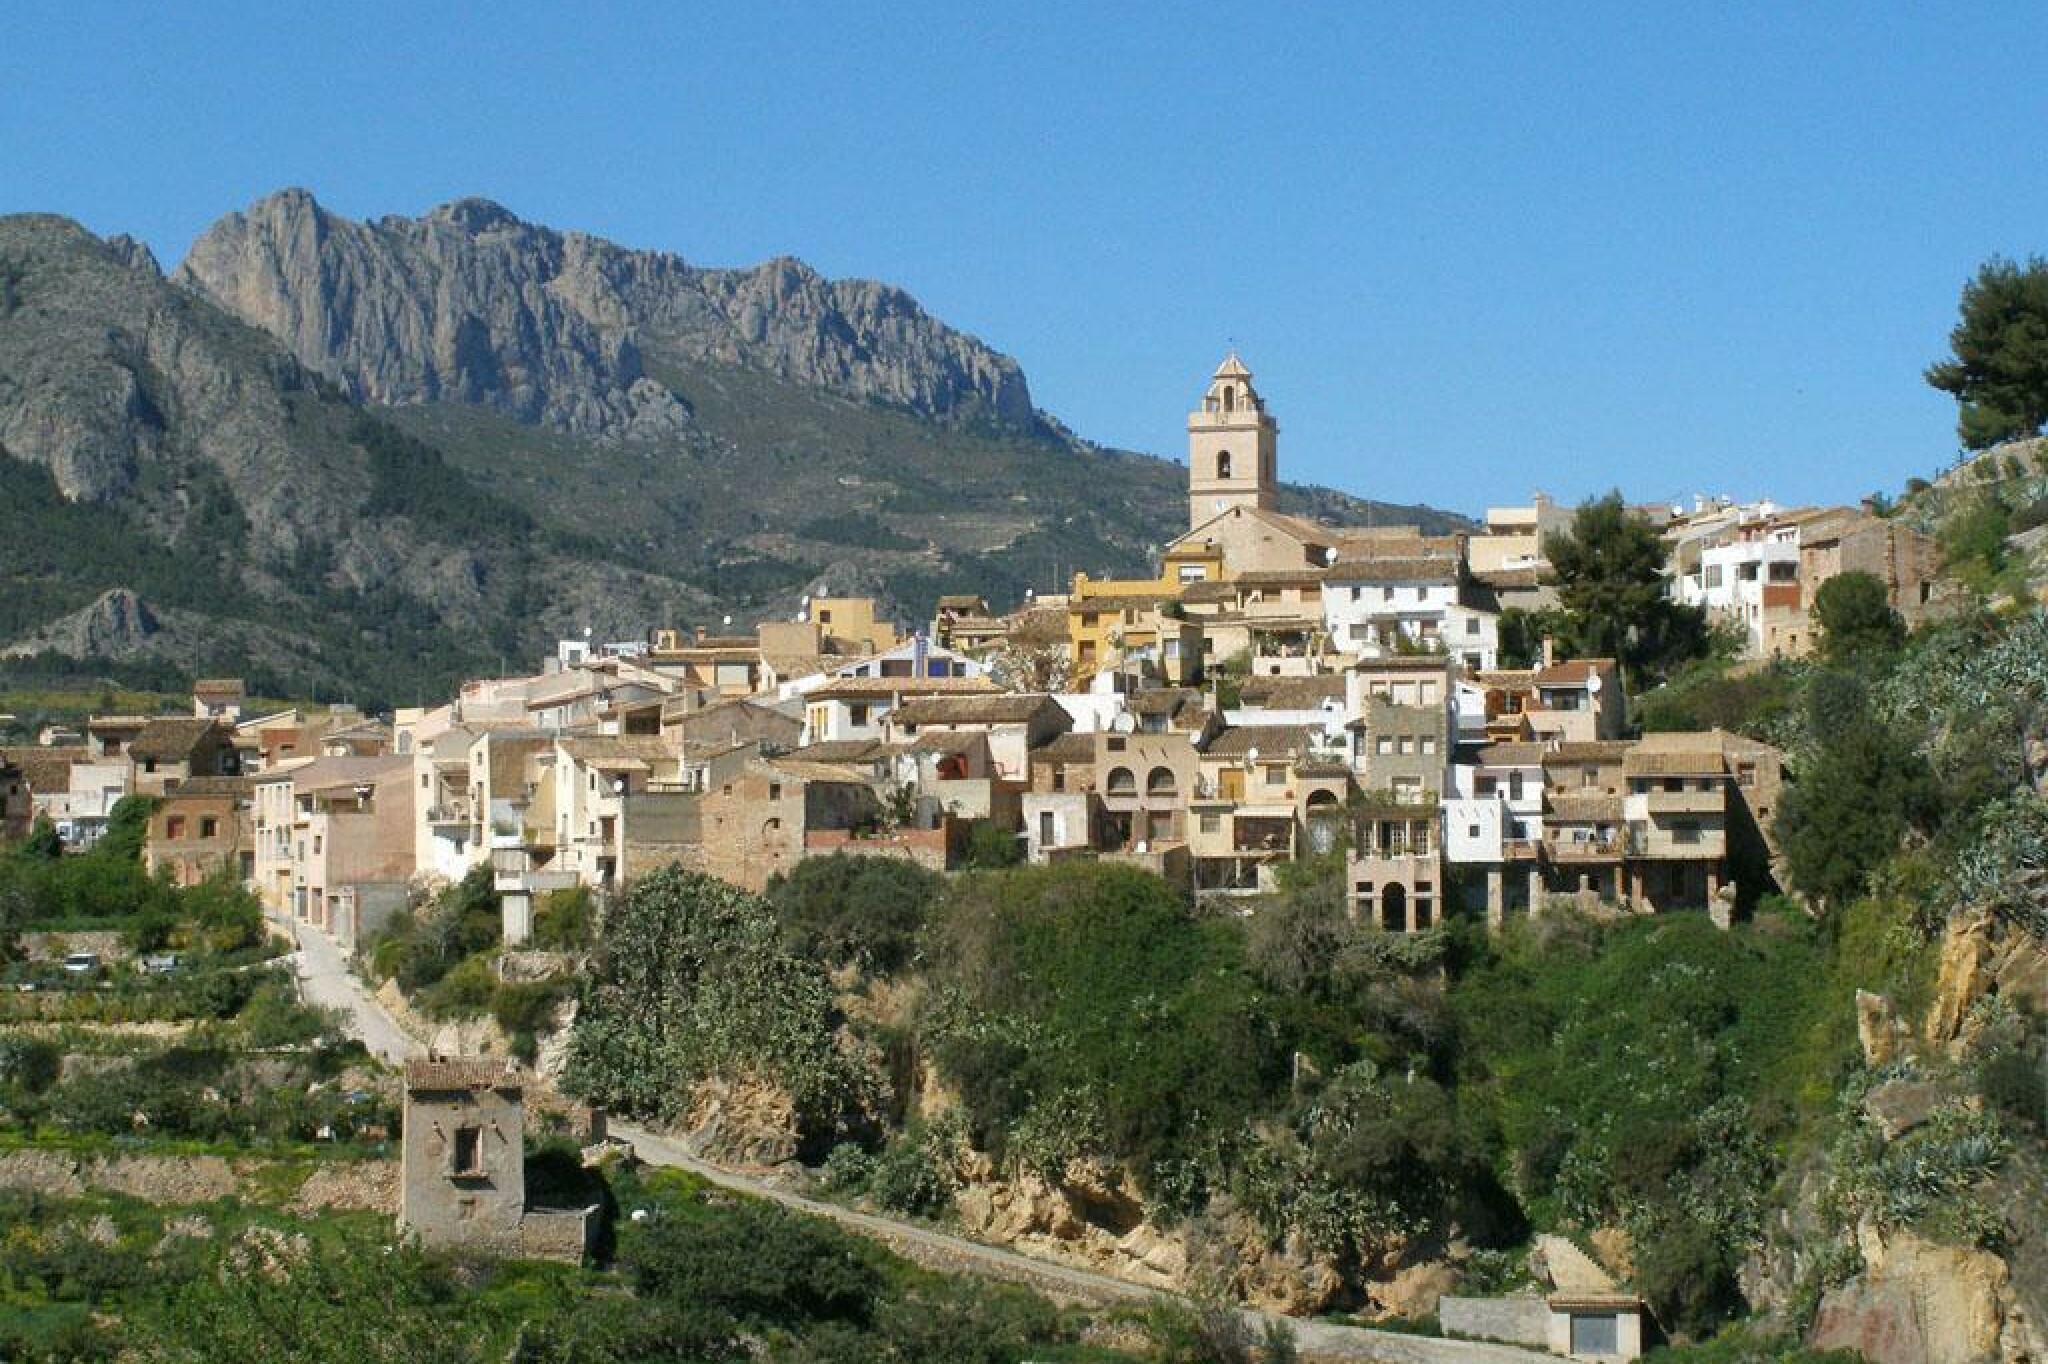 Demand for housing grows in small towns in the province of Alicante